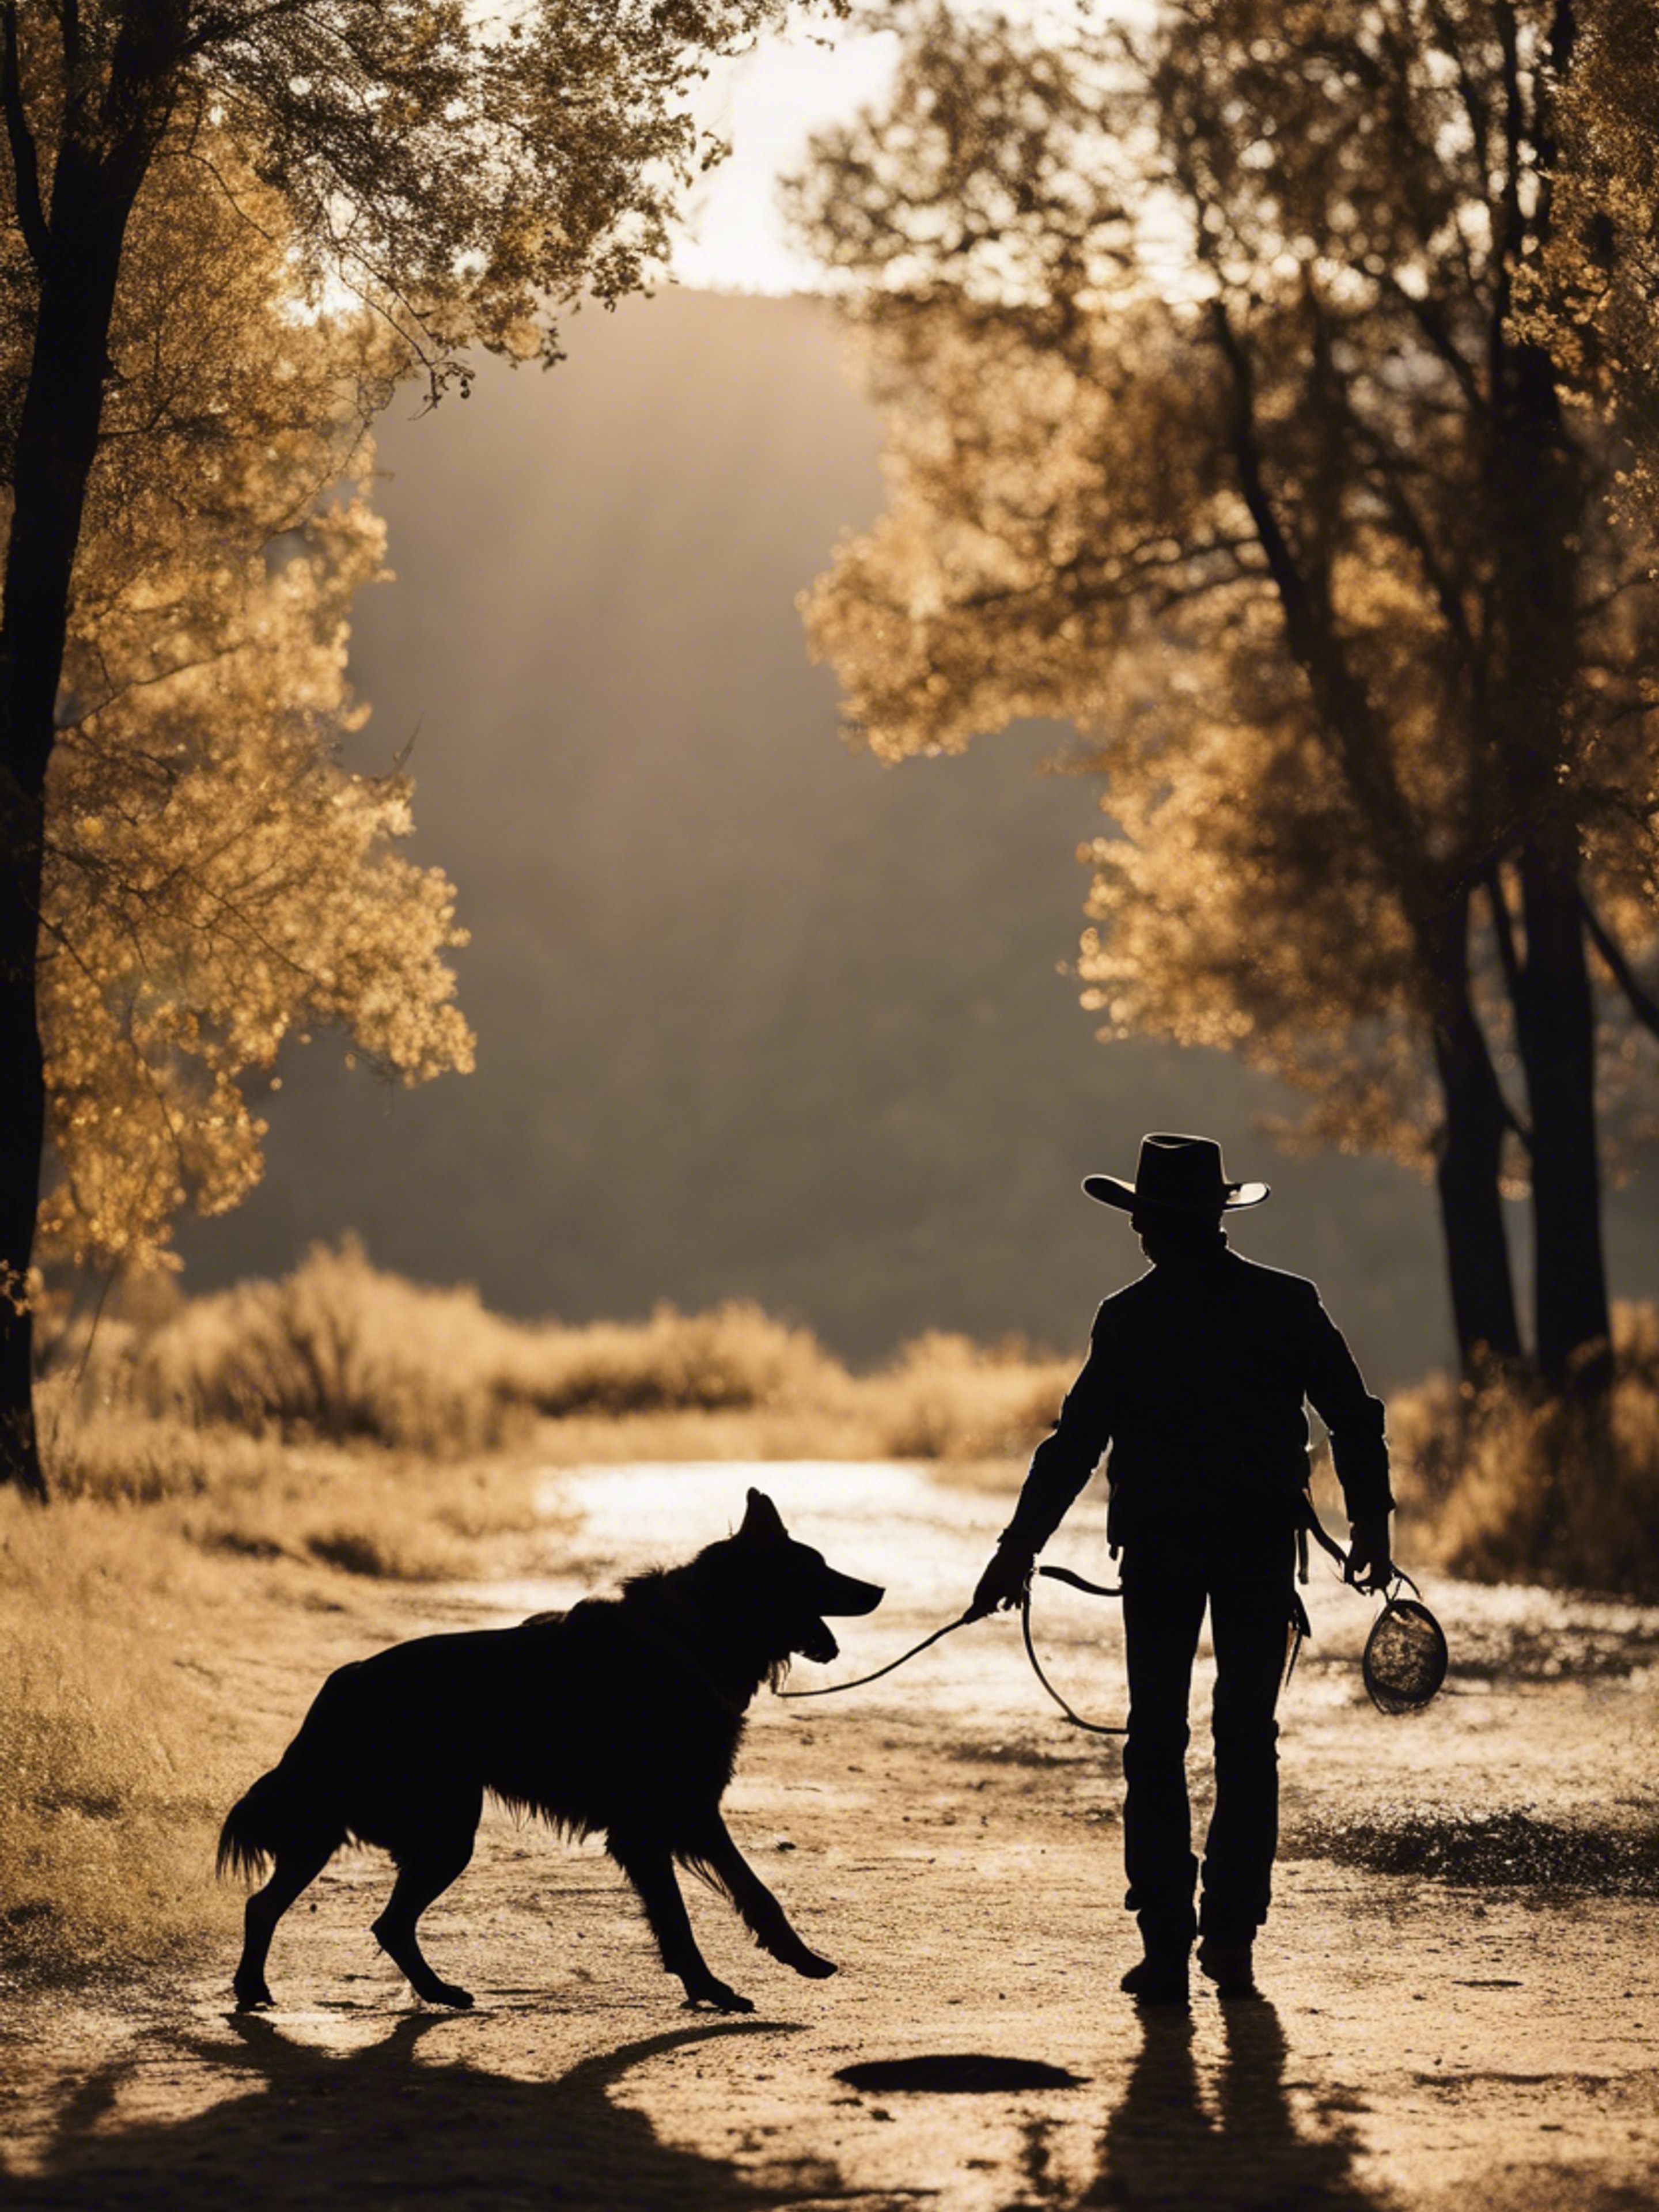 A silhouette photo of a cowboy playing fetch with his dog.壁紙[bb0b28a5720f4800bcd7]